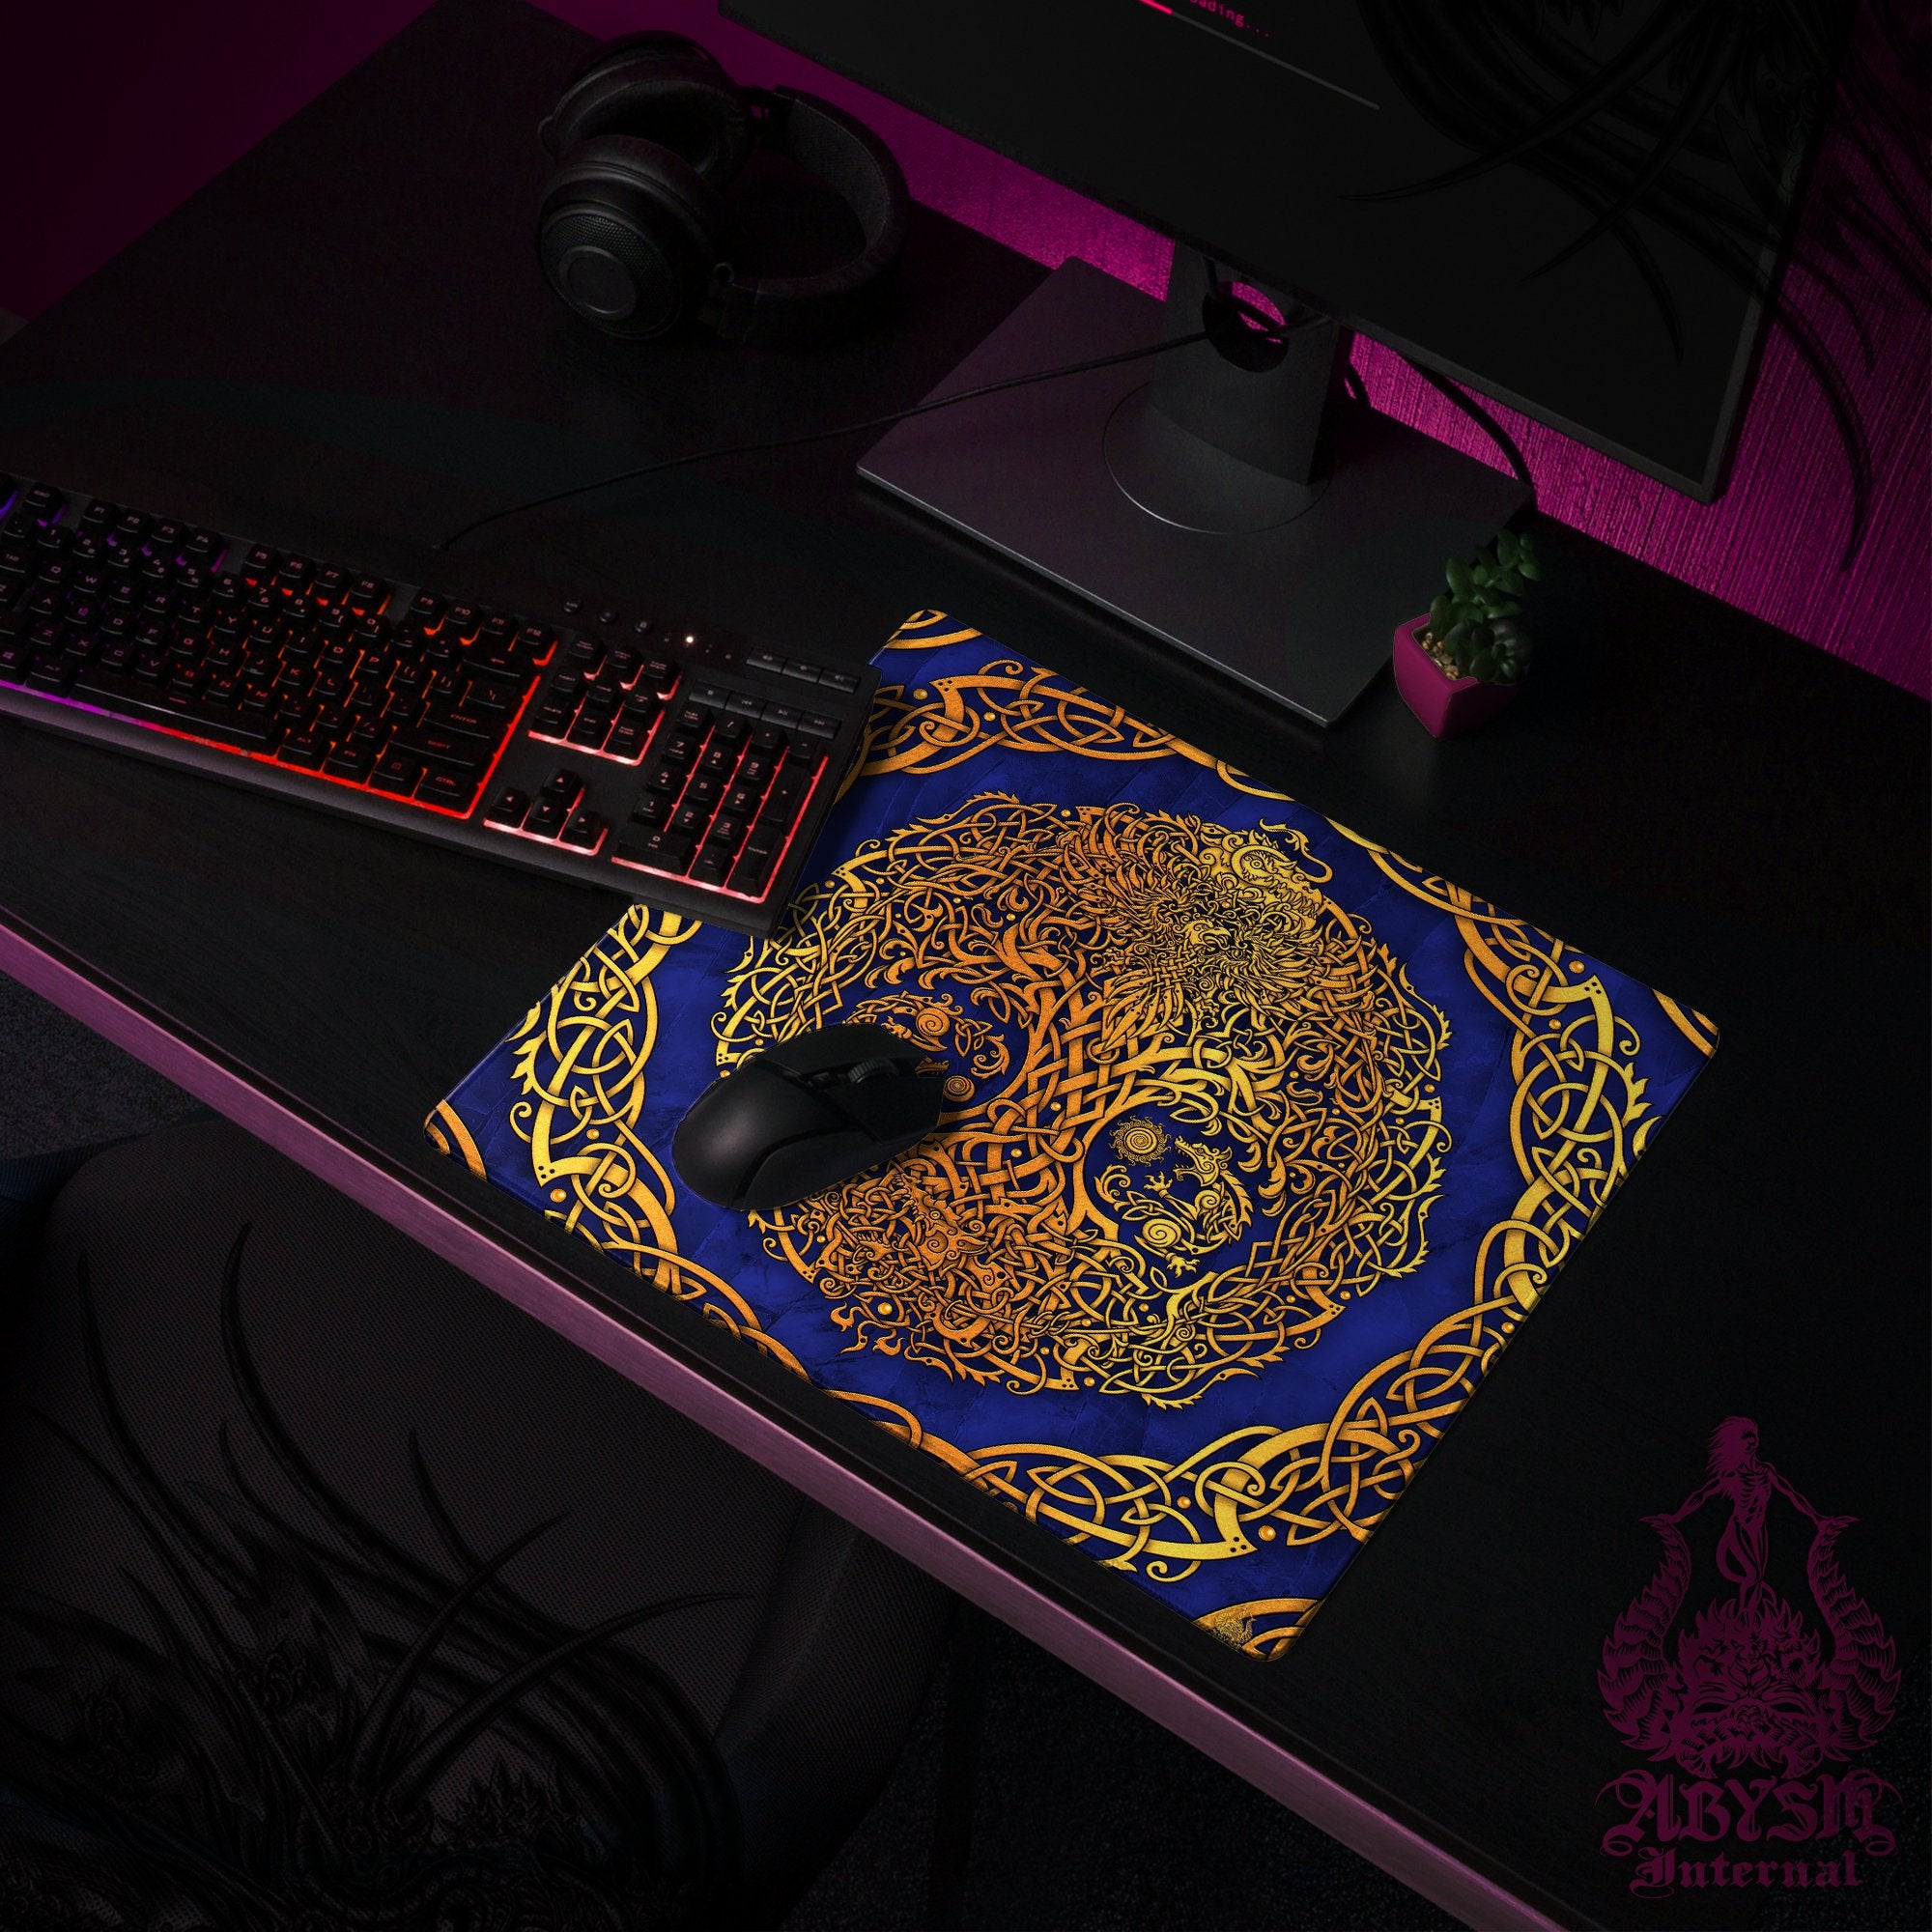 Gold Yggdrasil Desk Mat, Viking Gaming Mouse Pad, Norse Tree of Life Table Protector Cover, Knotwork Workpad, Nordic Art Print - 3 Colors - Abysm Internal